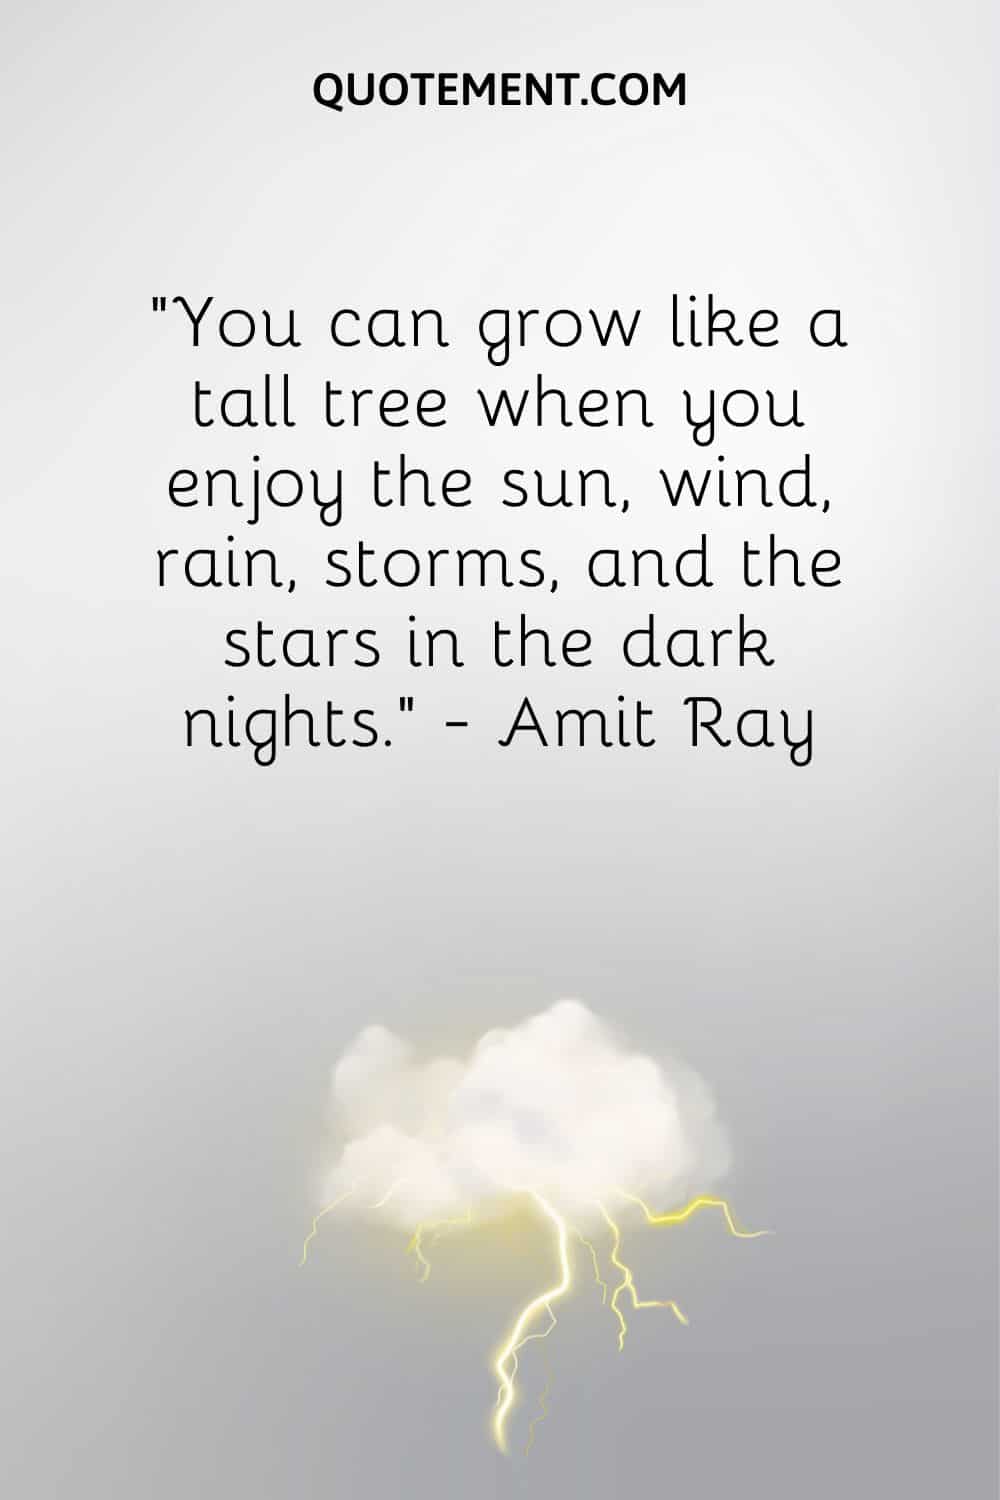 lightning from a cloud image representing lightning aesthetic quote